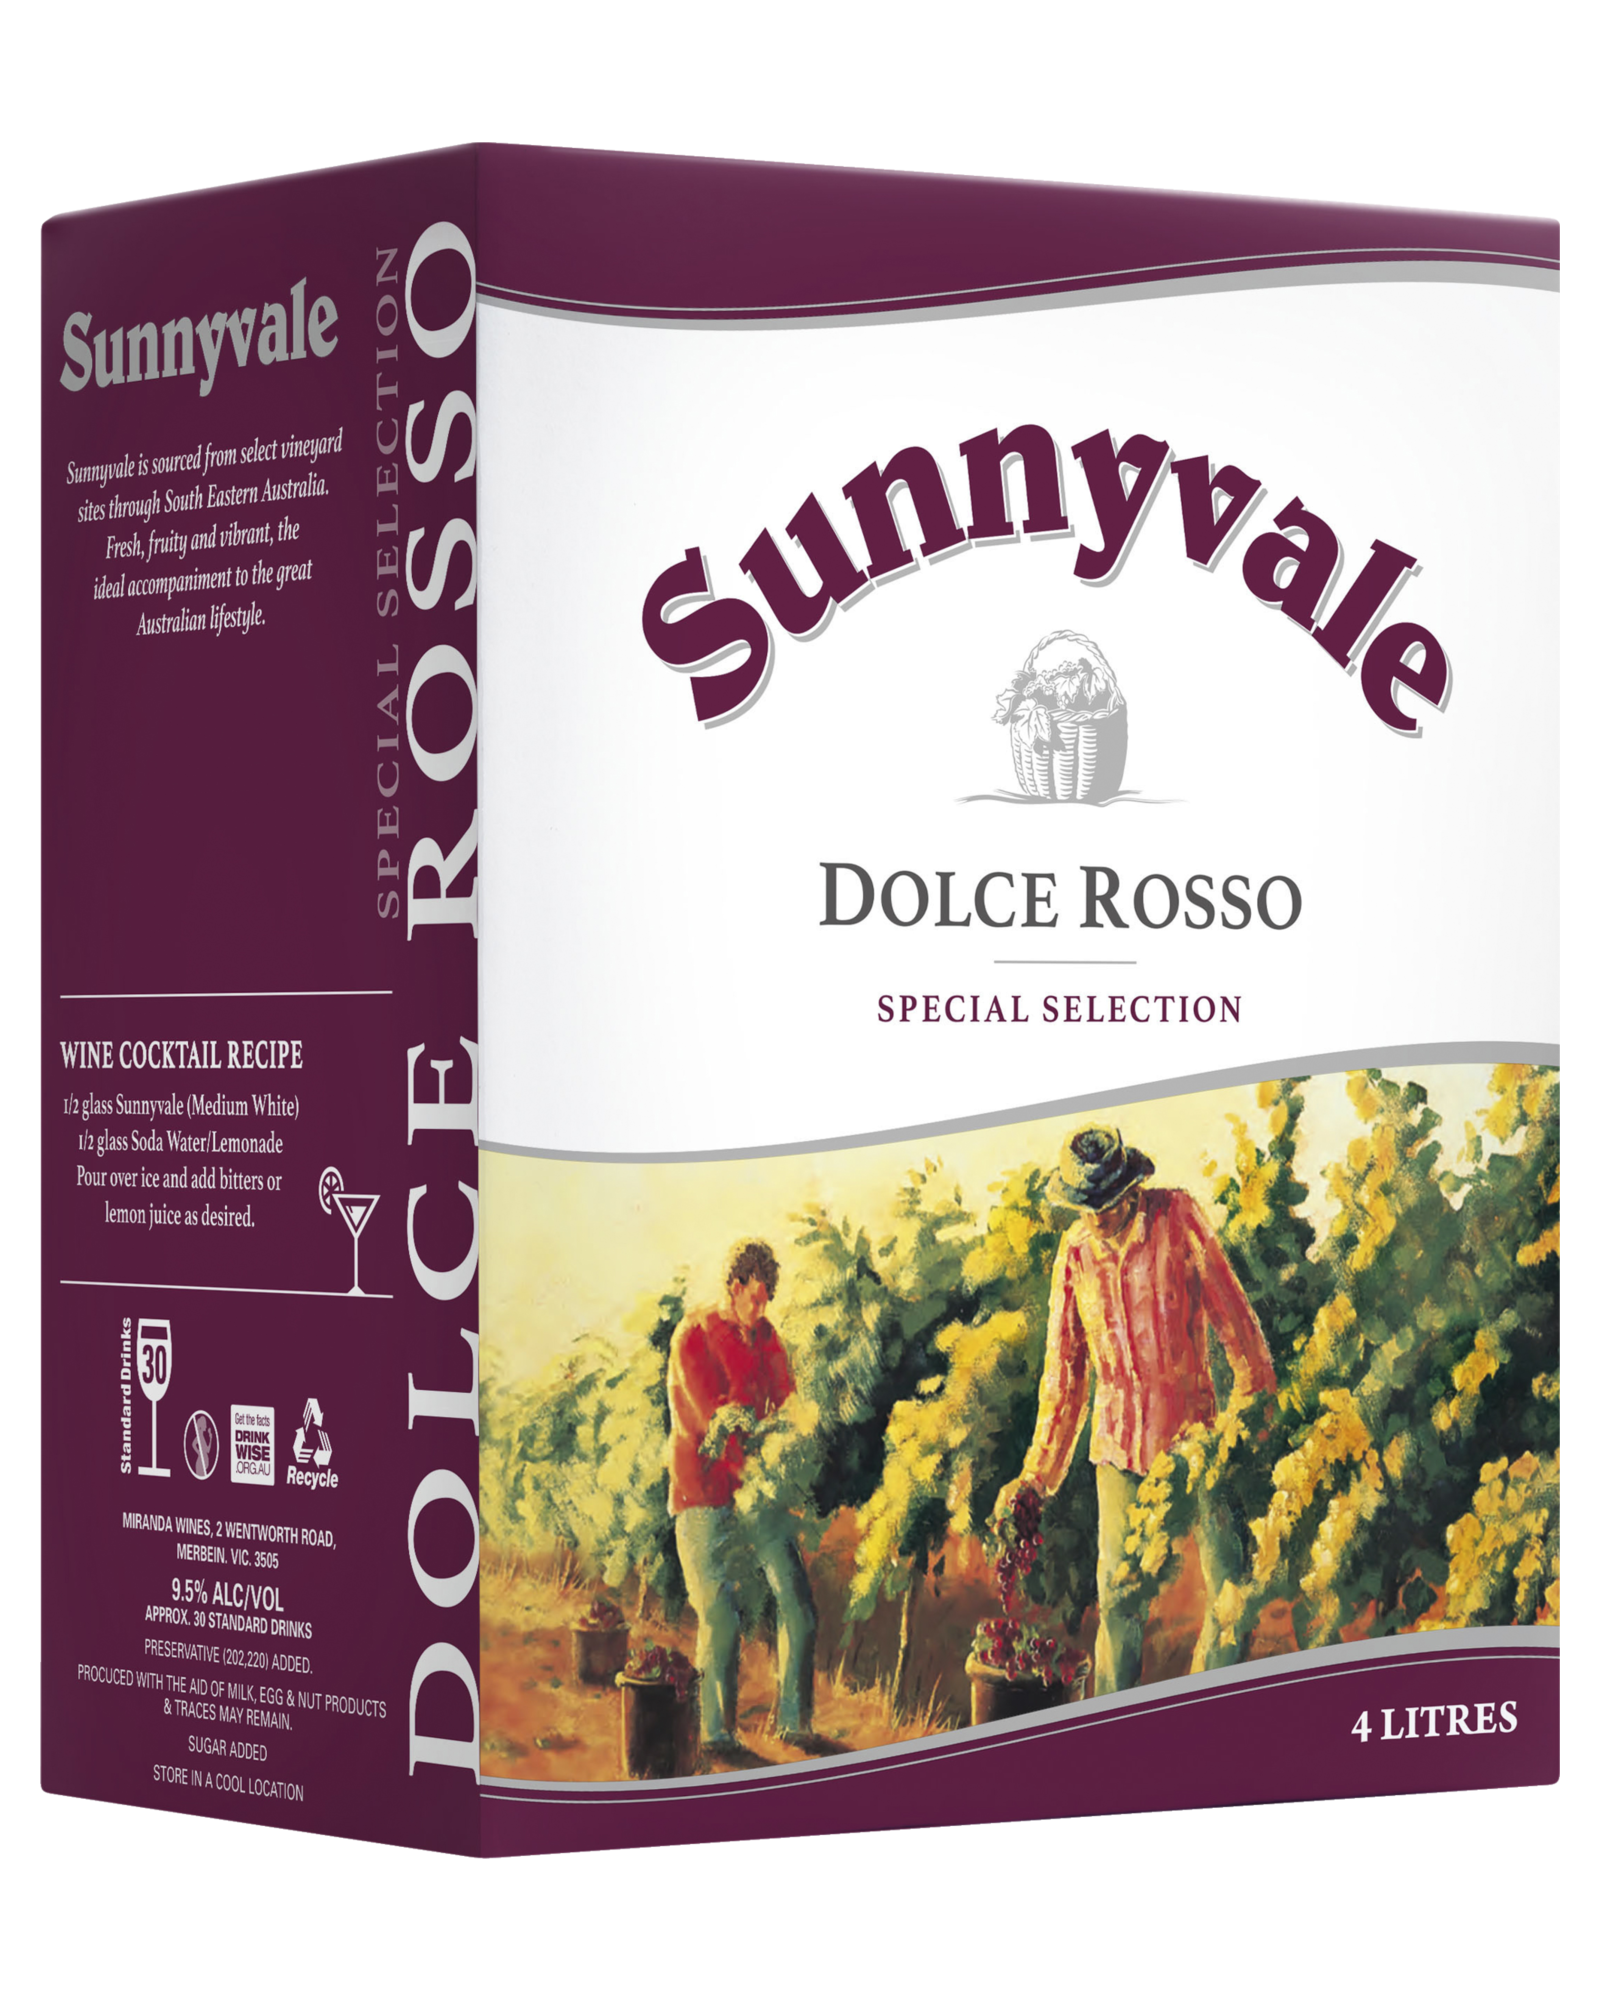 Sunnyvale Dolce Rosso Cask 4L